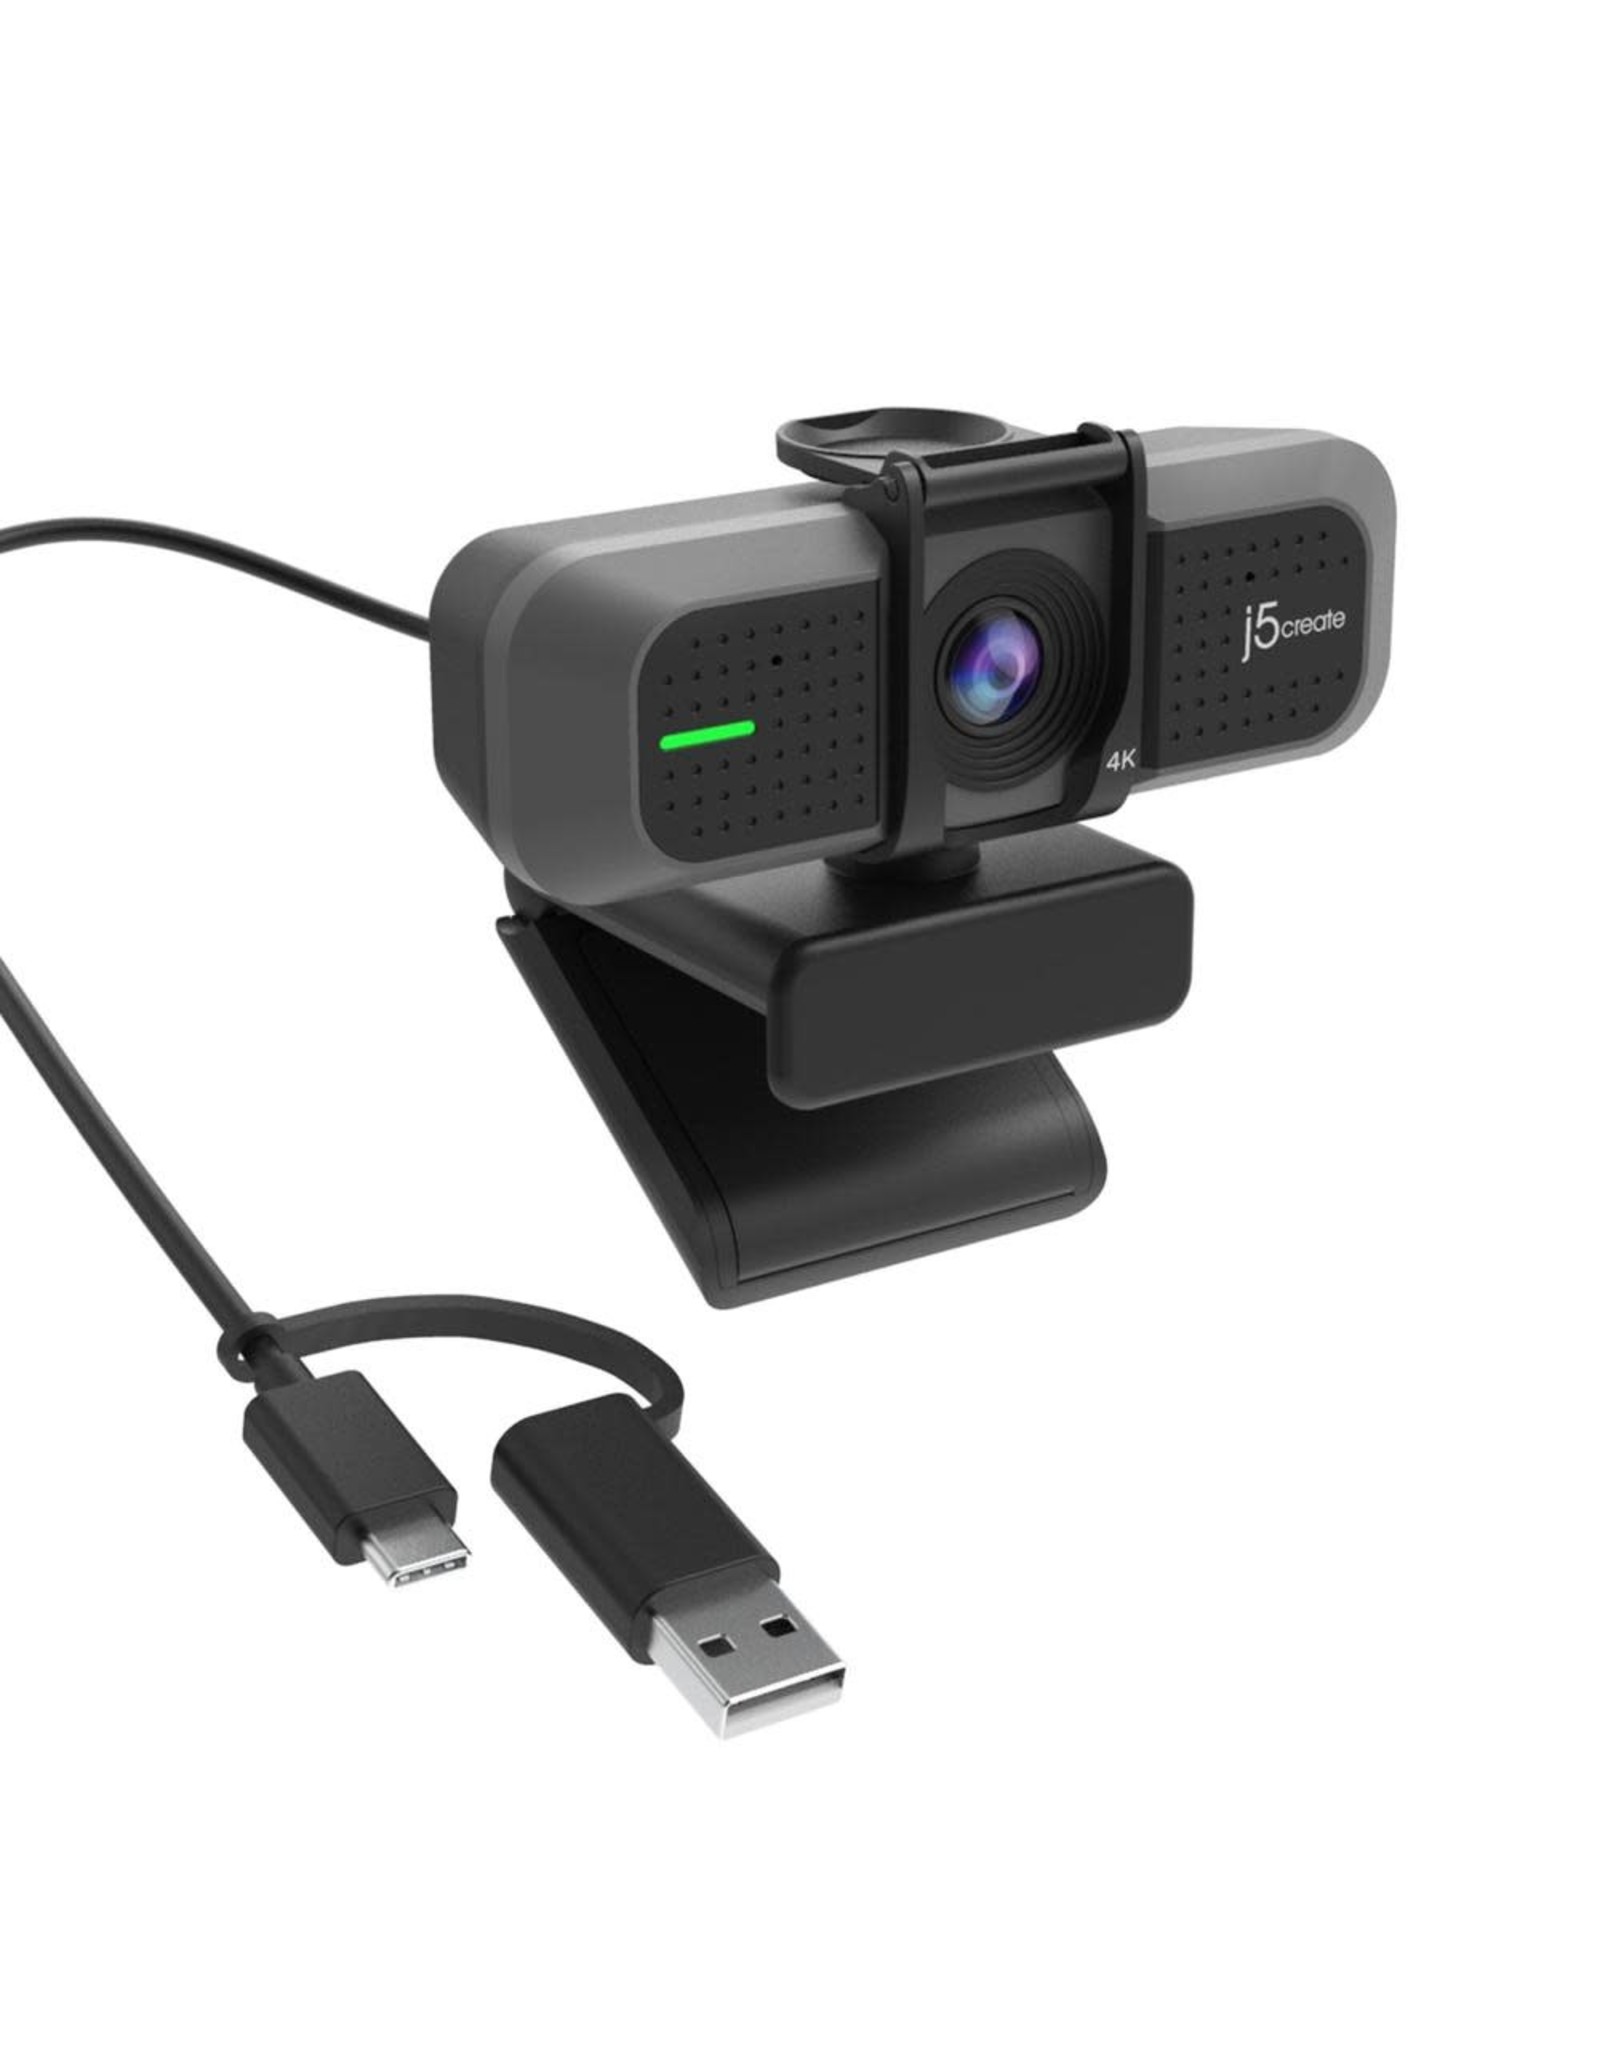 j5create j5create USB 4K Ultra HD Webcam - Supports 4K at 30FPS or 1080P at 60FPS